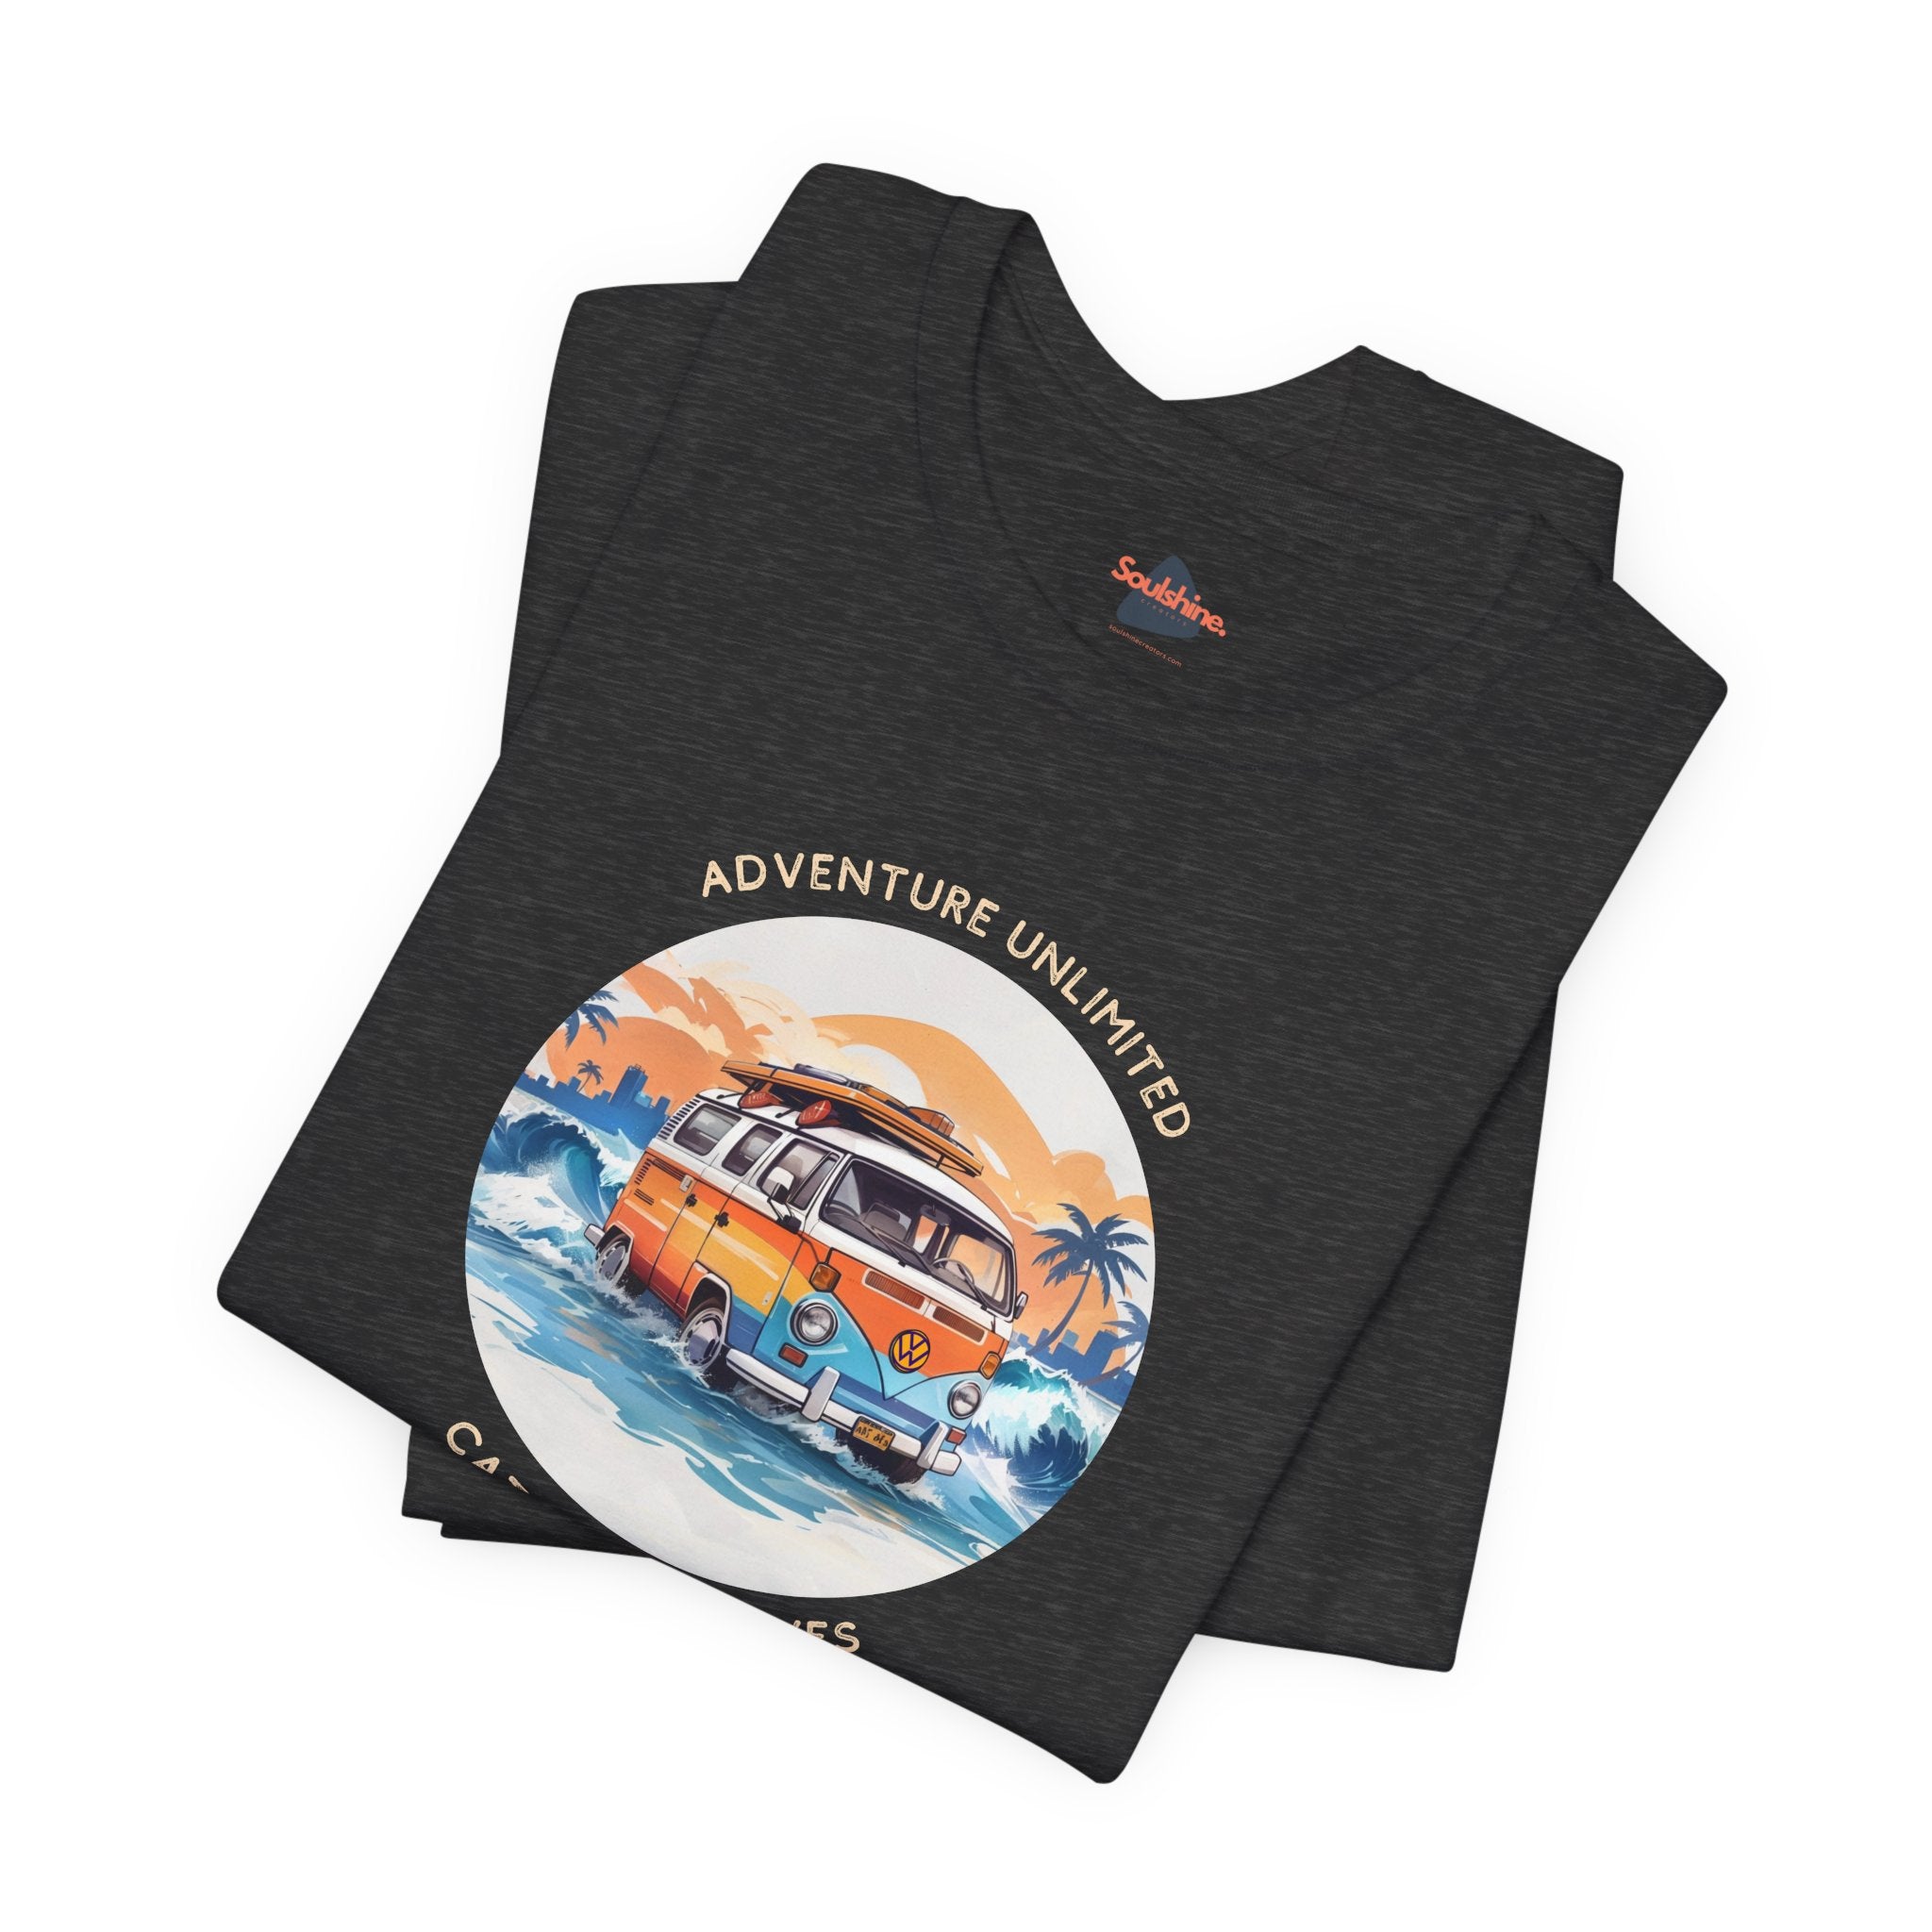 Adventure Unlimited printed black t-shirt with van and surfboard design